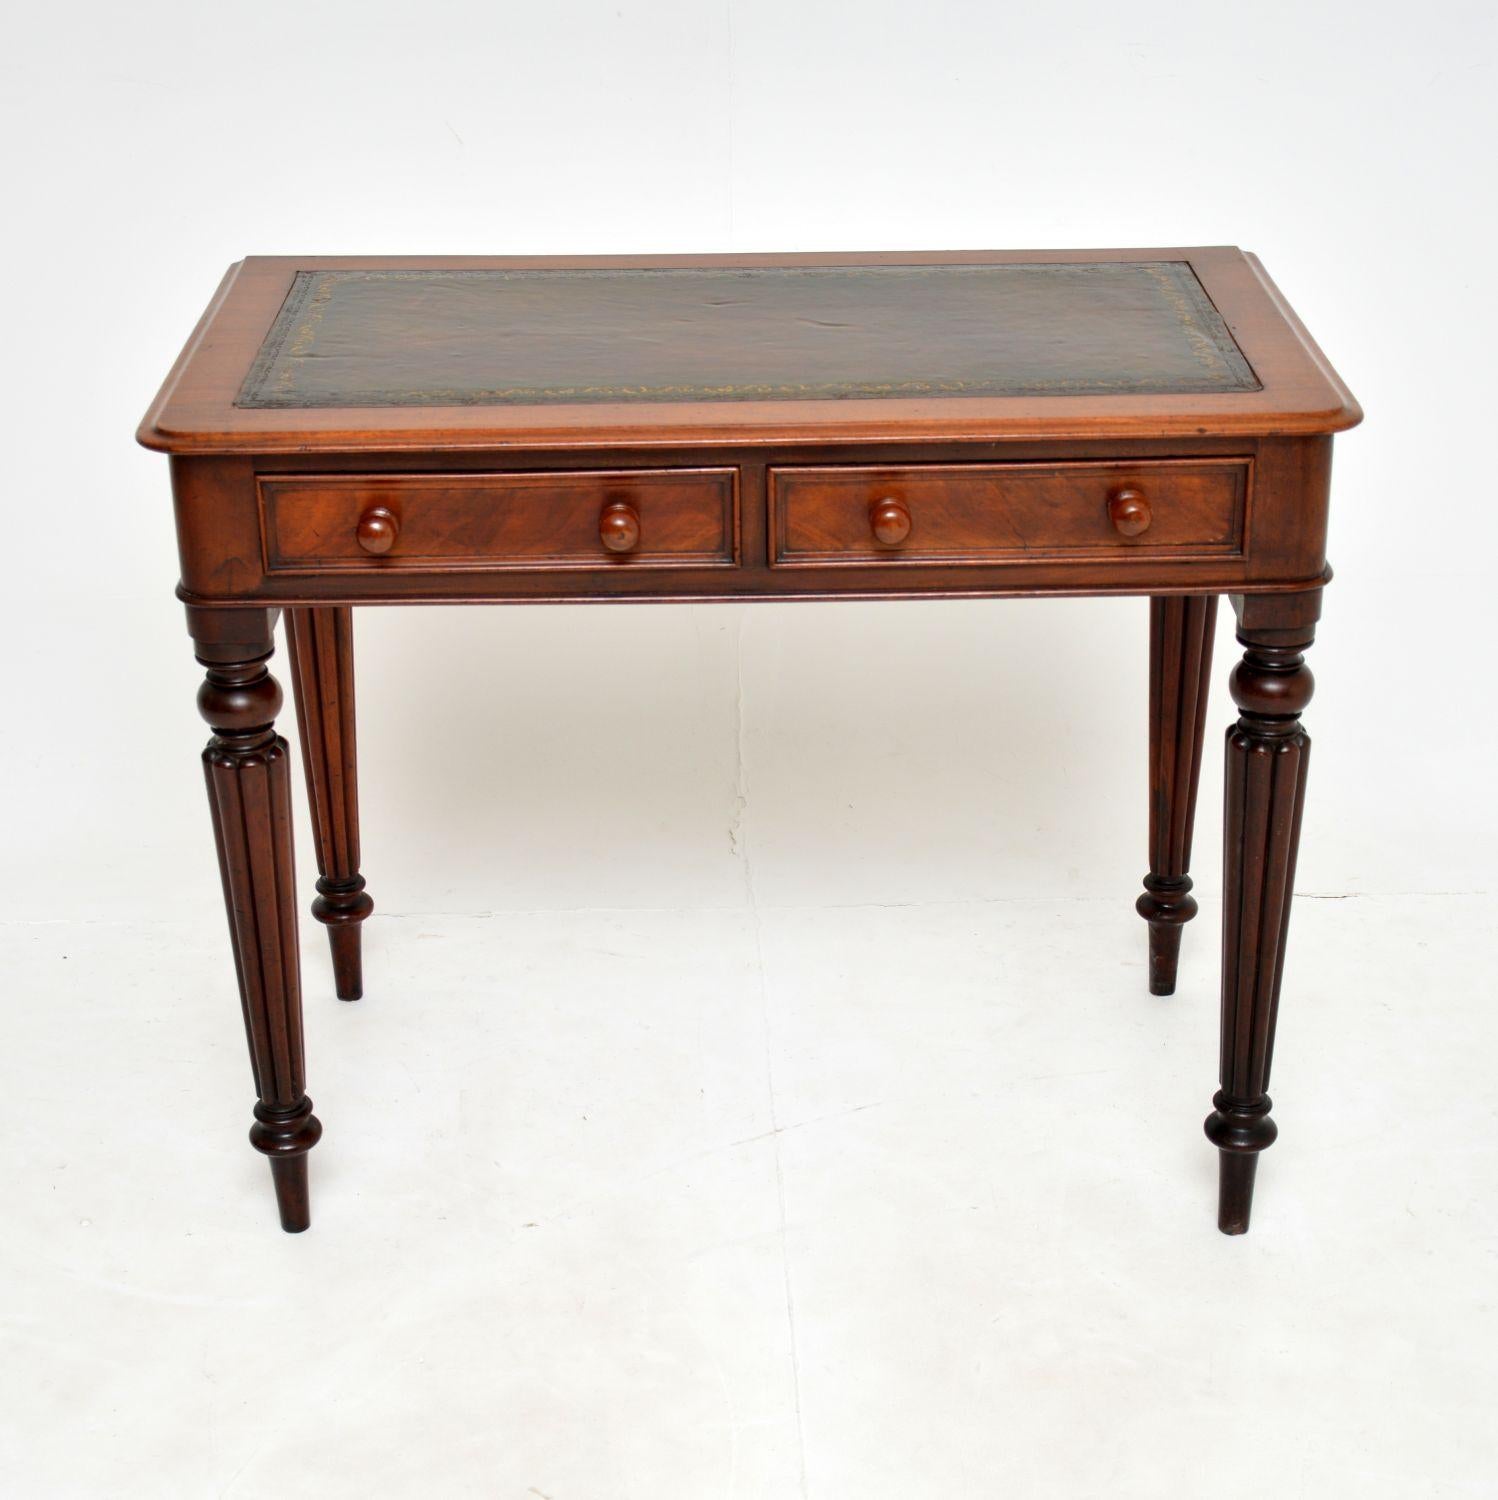 An excellent original William IV period writing table. This was made in England, it dates from around the 1840-1860 period.

The quality is amazing, this has very strong and beautifully carved legs and beautiful overall design. There are lovely